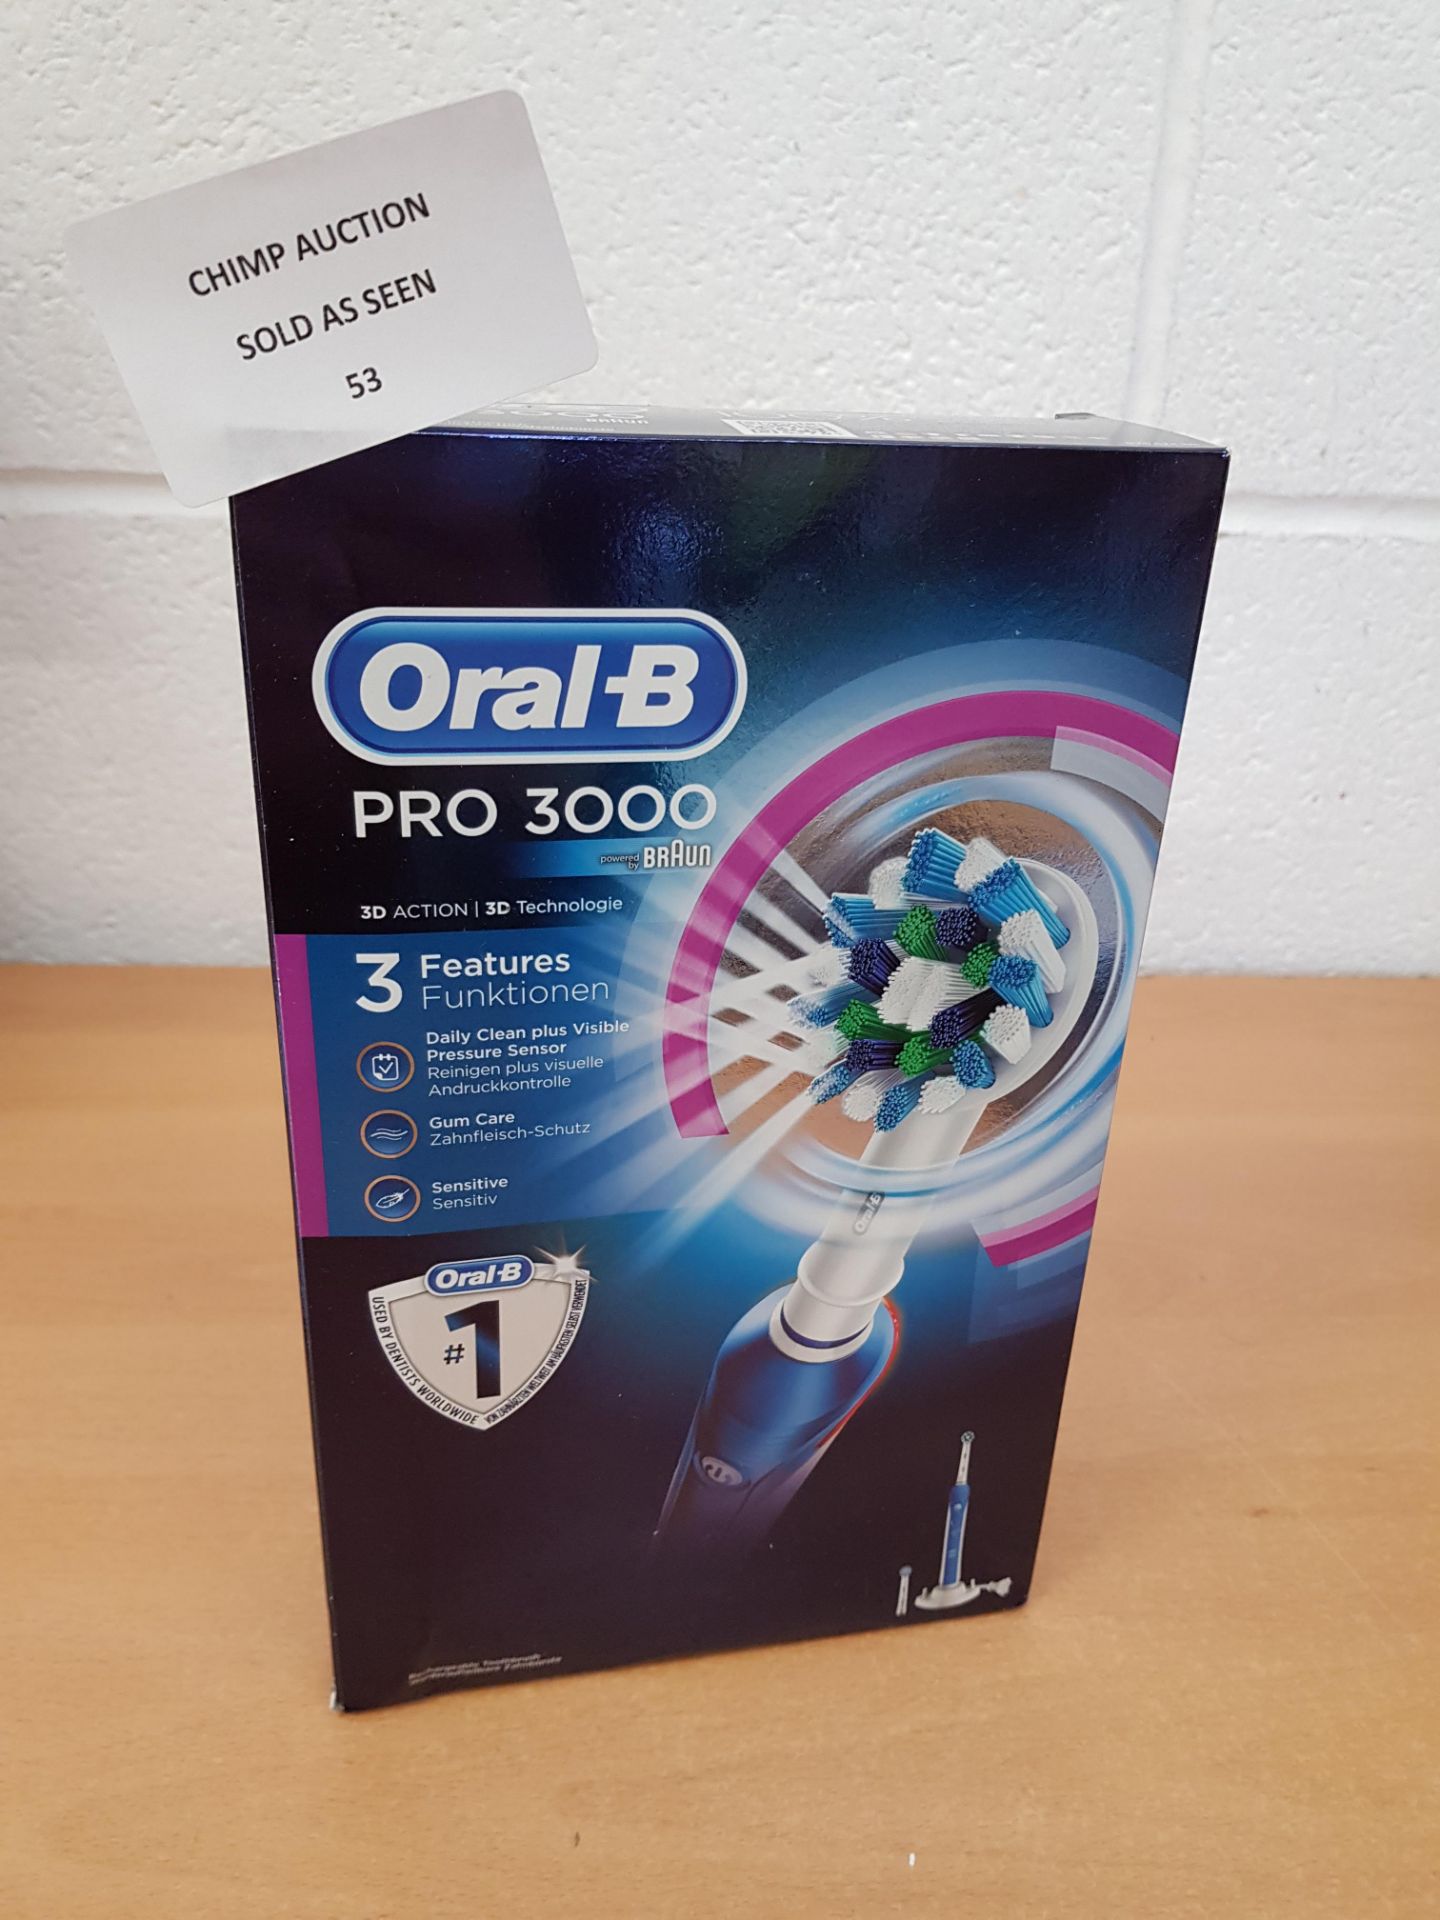 Oral-B Pro 3000 3D Action electric toothbrush RRP £129.99.